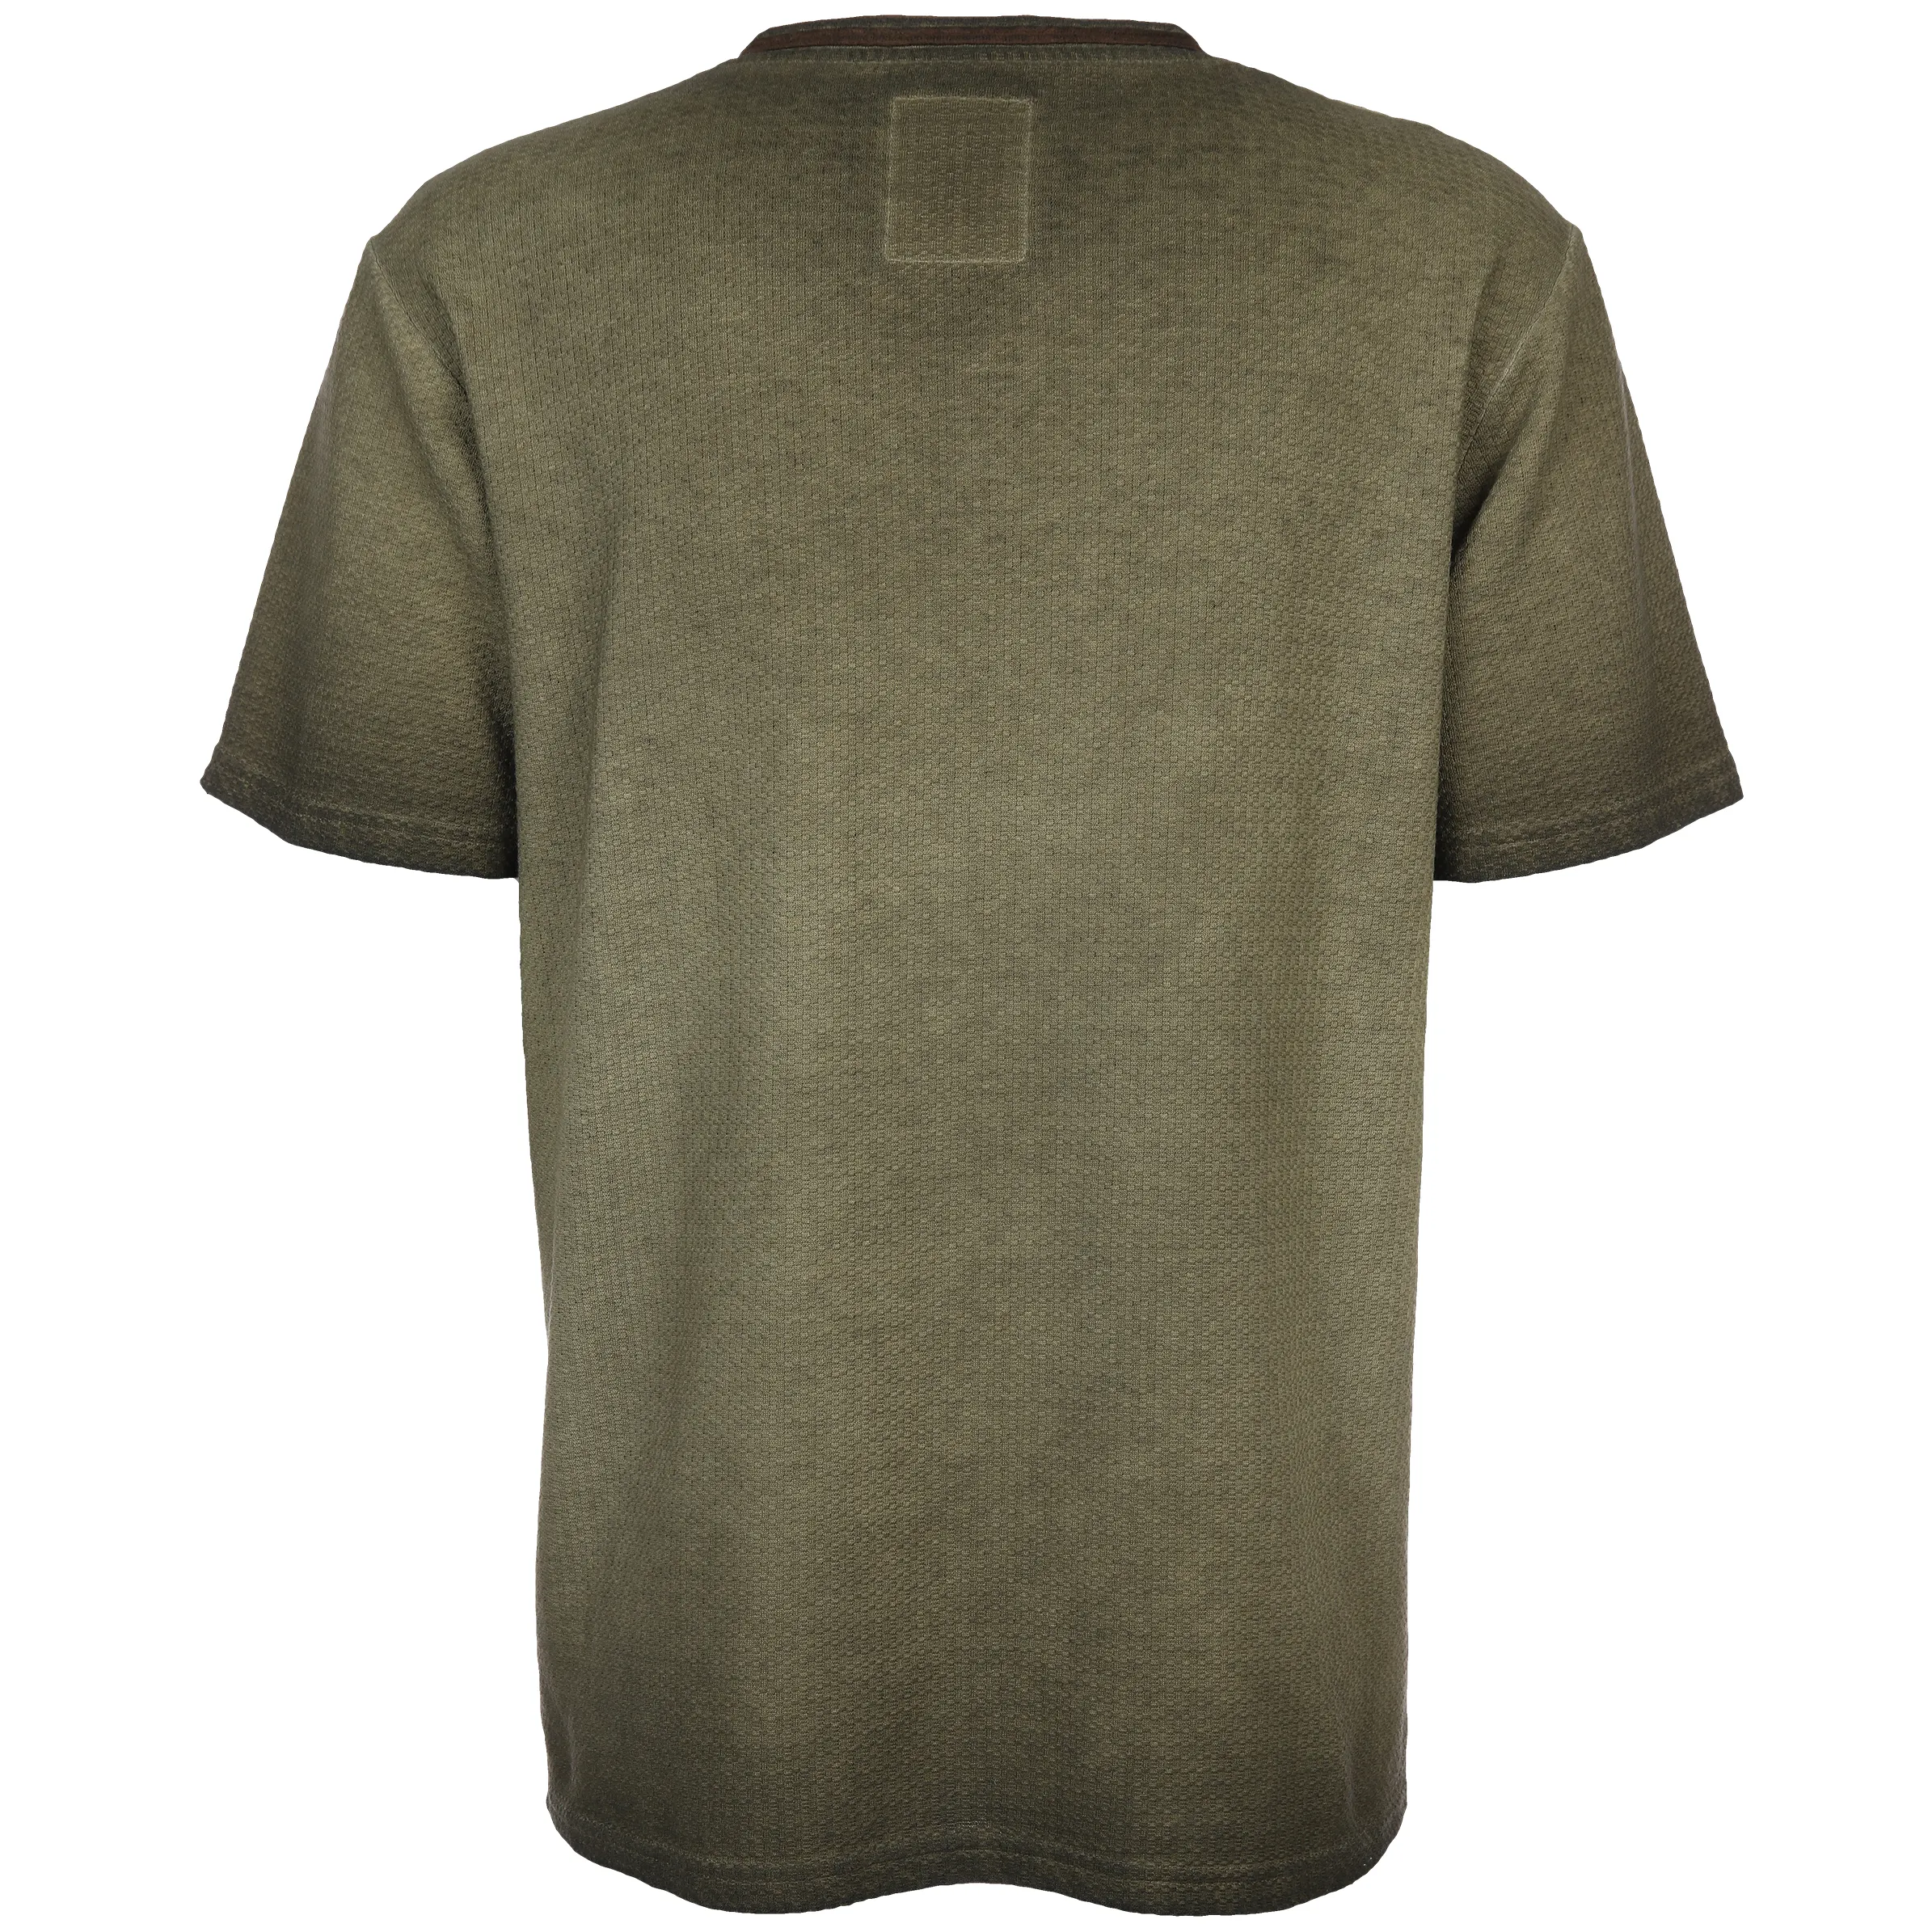 Southern Territory He. Henleyshirt 1/2 Arm suede 2in1 Oliv 886498 OLIVE 2